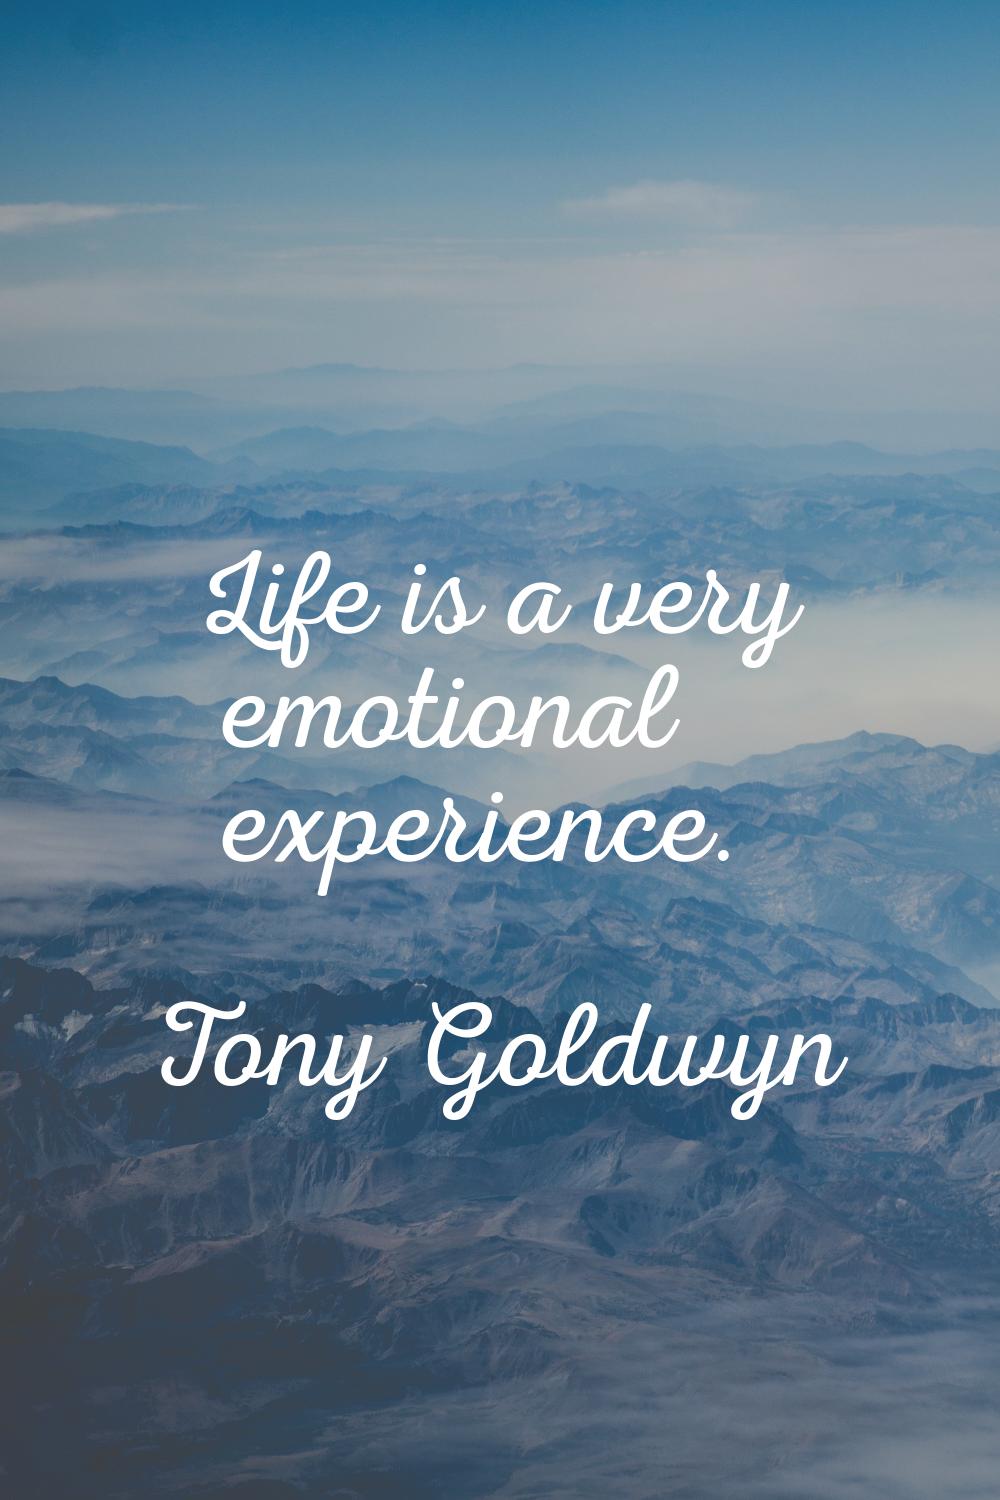 Life is a very emotional experience.